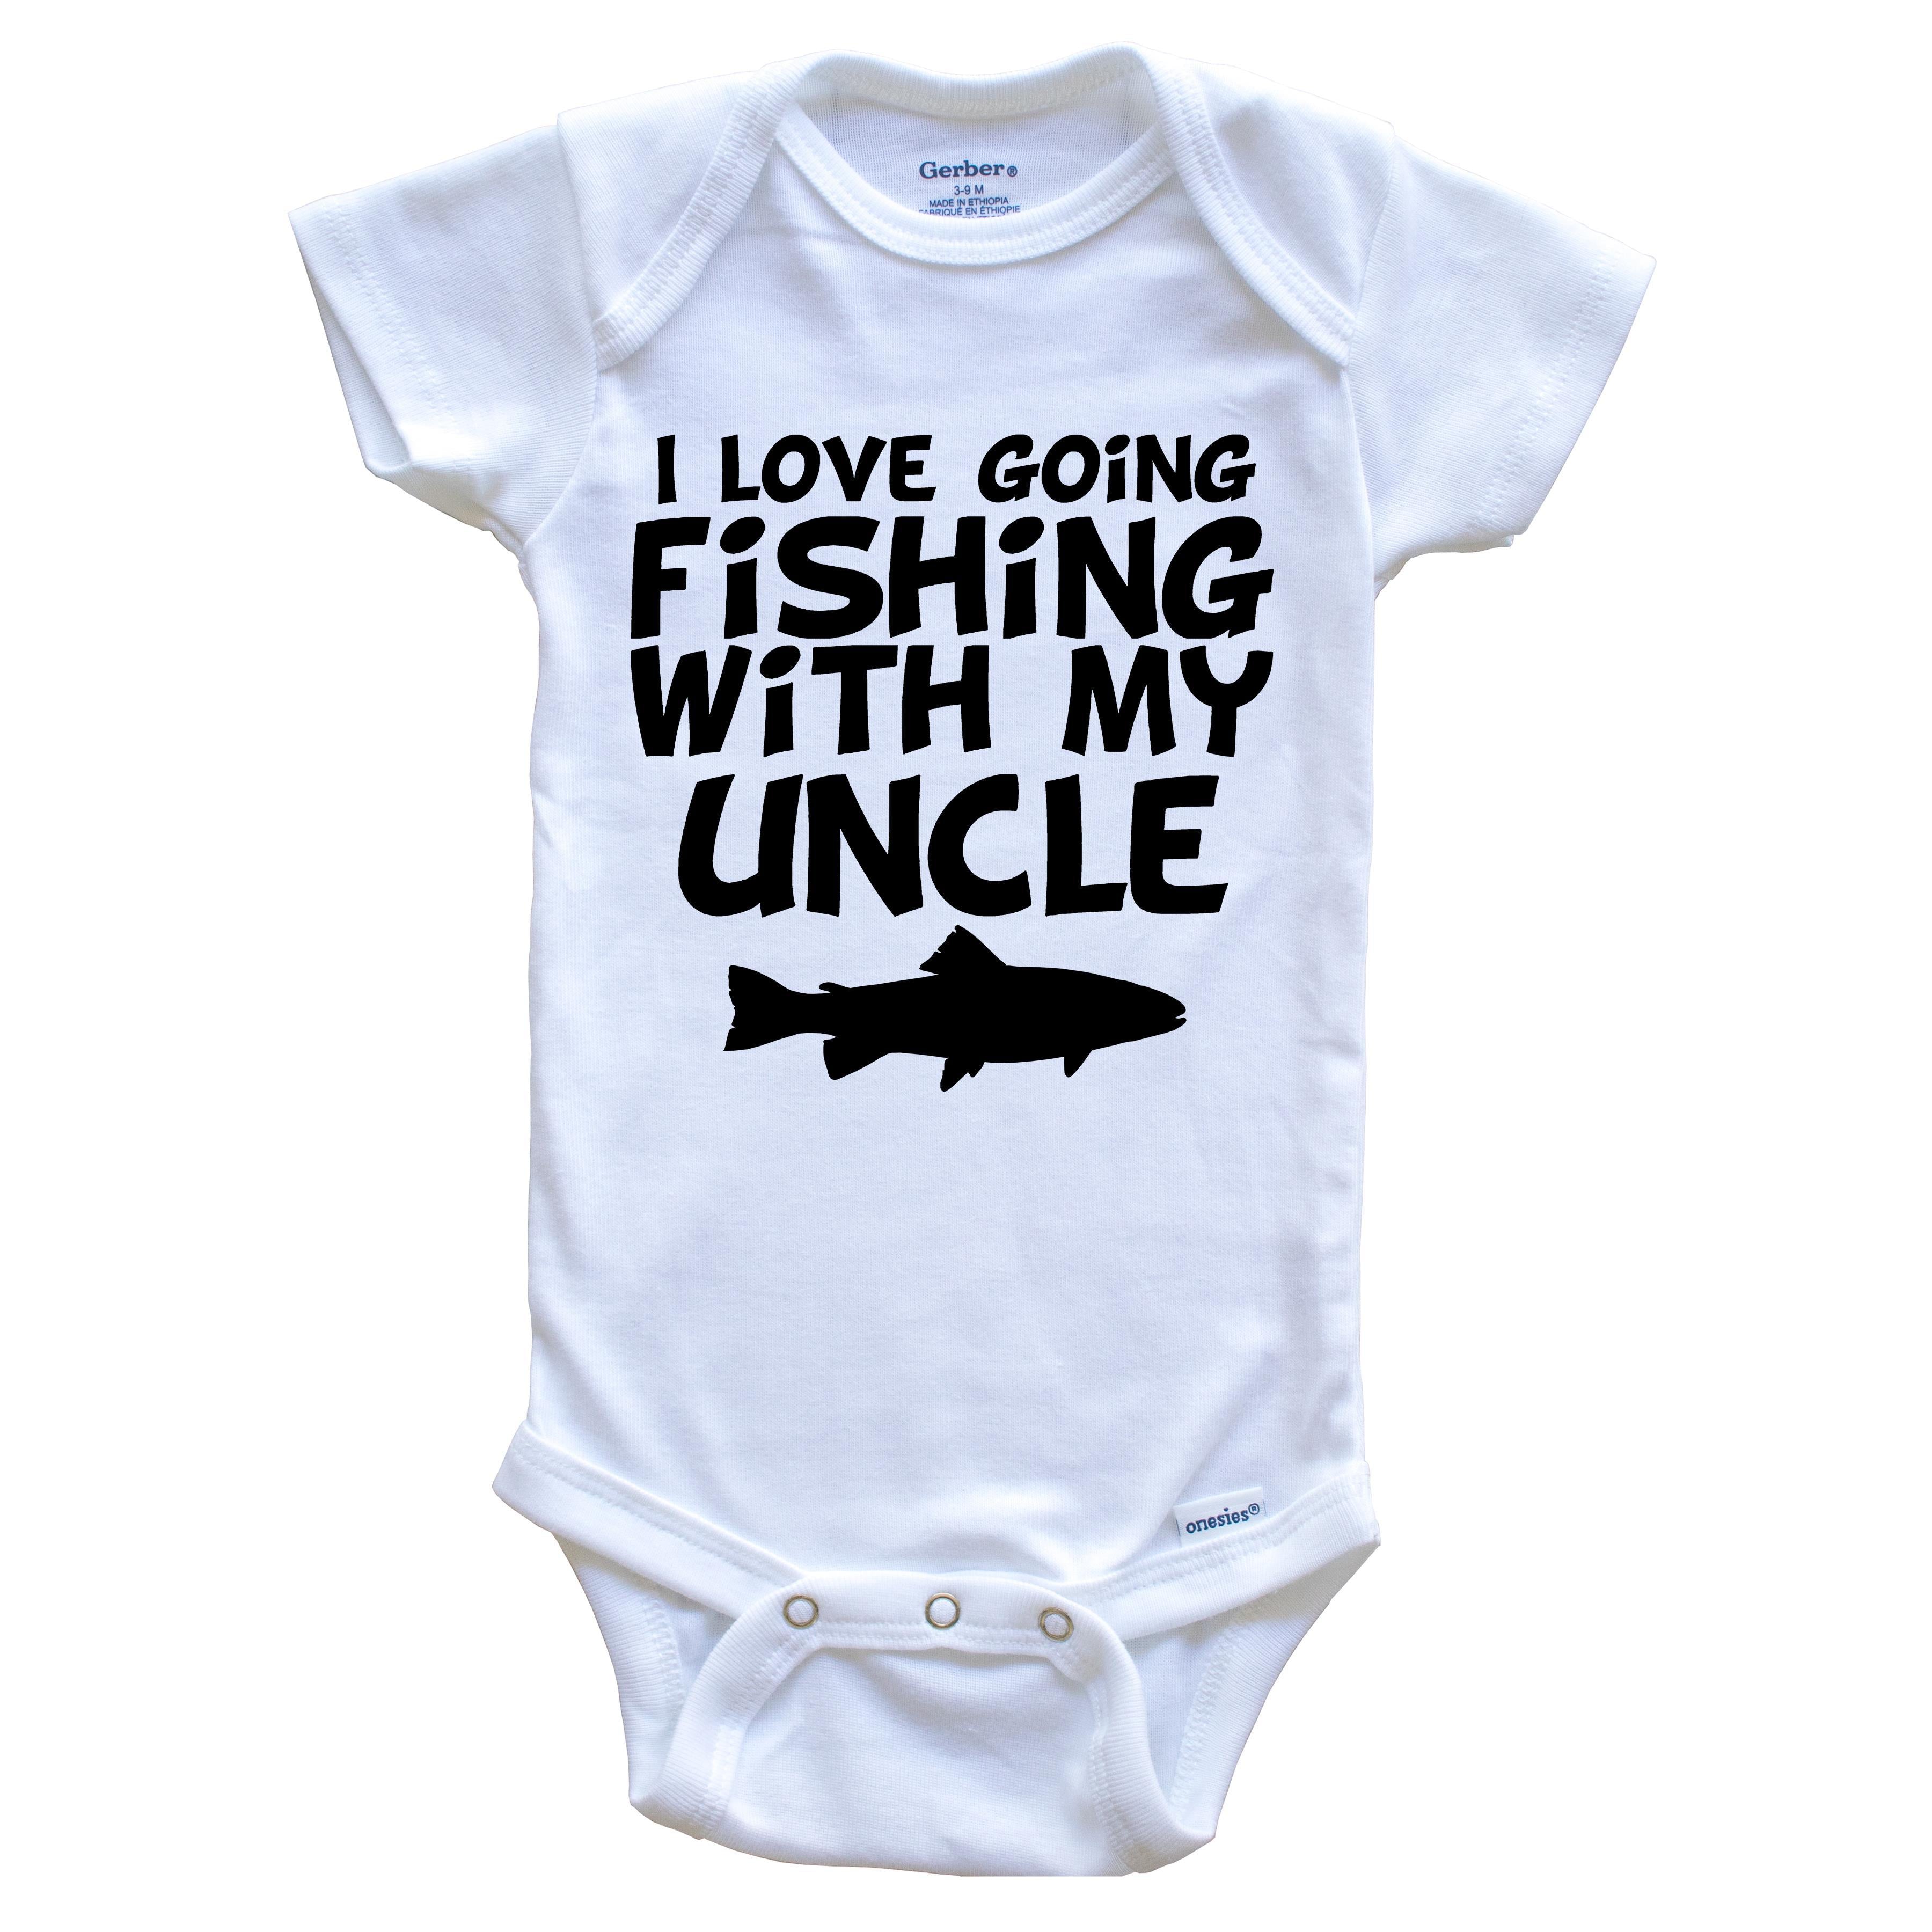 I Love Going Fishing With My Uncle Baby Onesie – Really Awesome Shirts